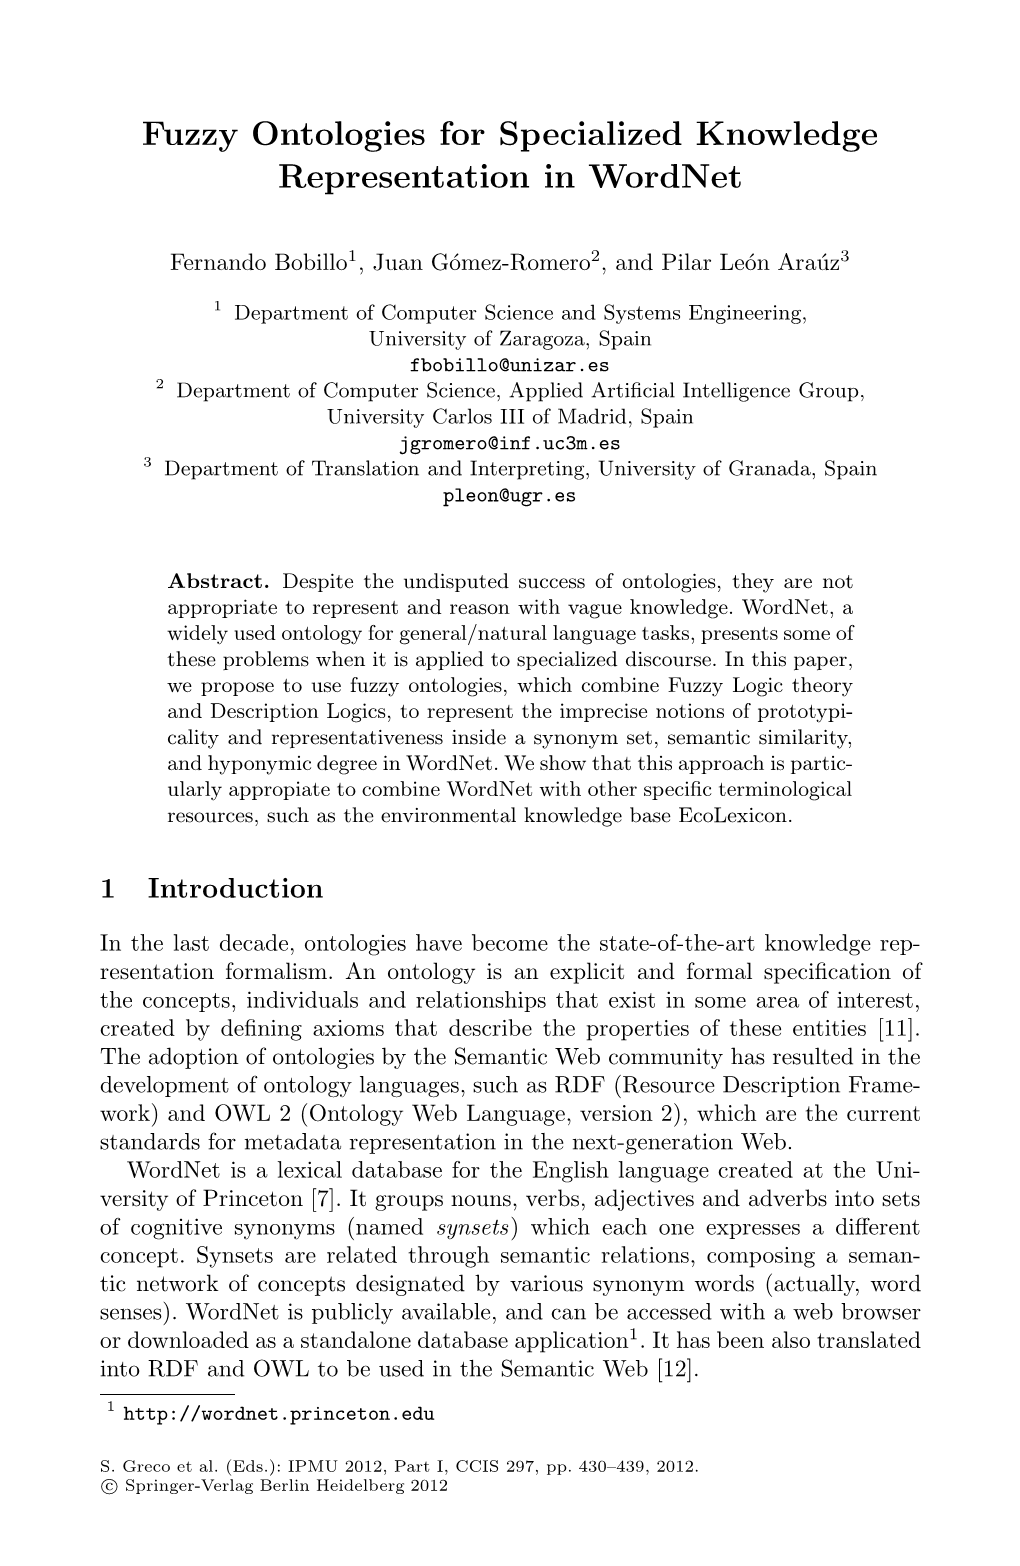 Fuzzy Ontologies for Specialized Knowledge Representation in Wordnet